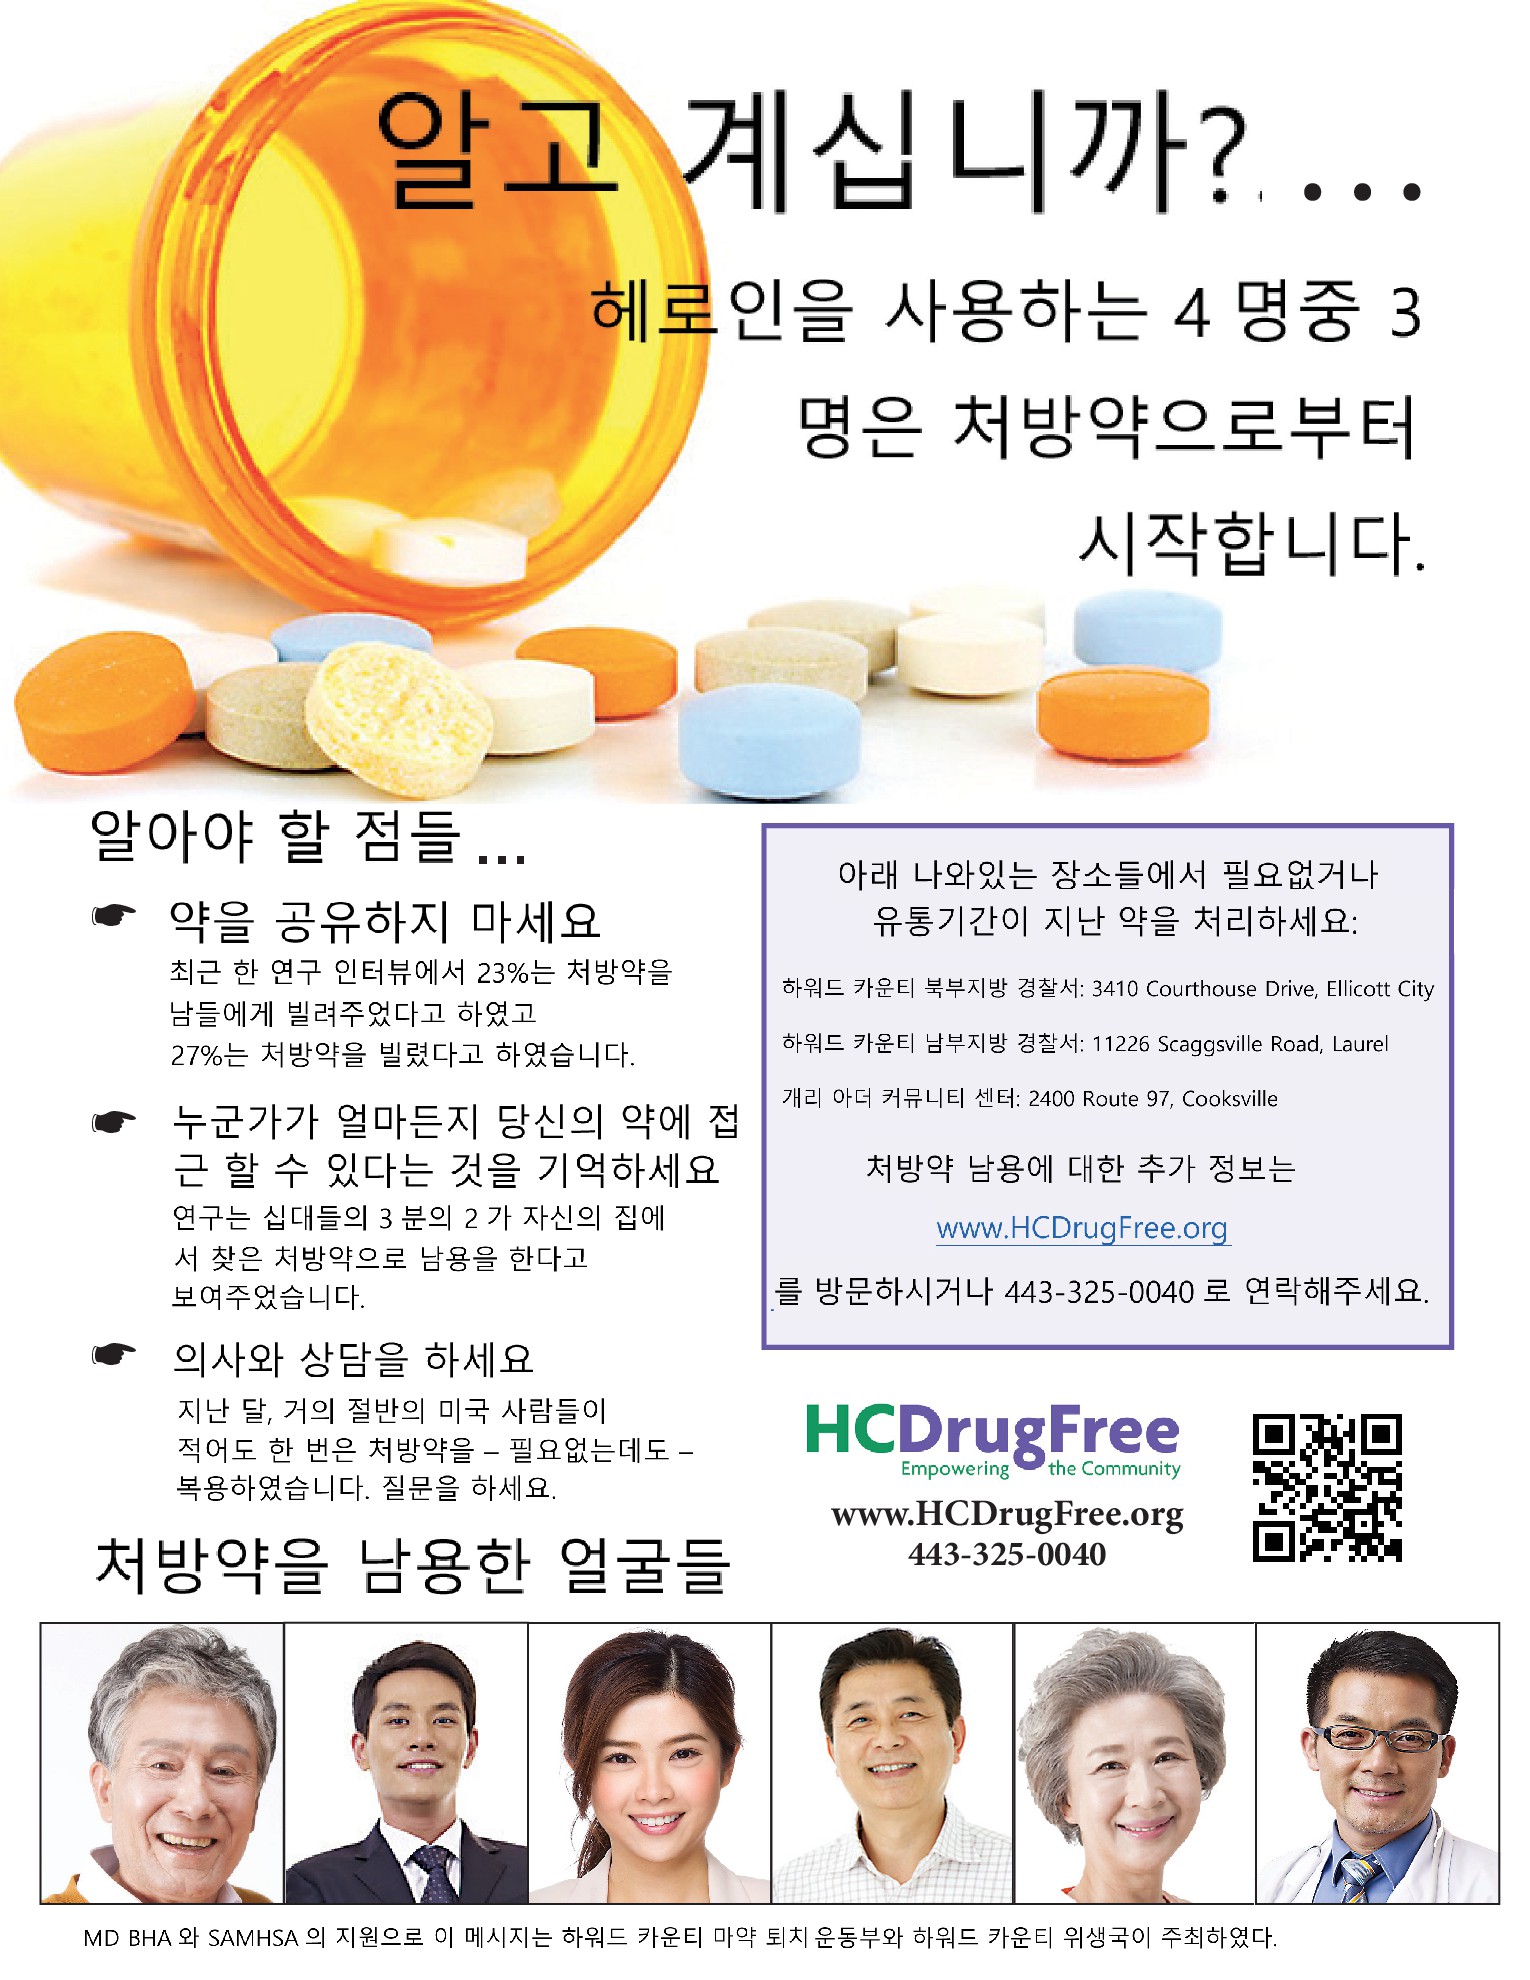     Korean Association Against Drug Abuse       National Asian Pacific American Families Against Substance Abuse (NAPAFASA)    